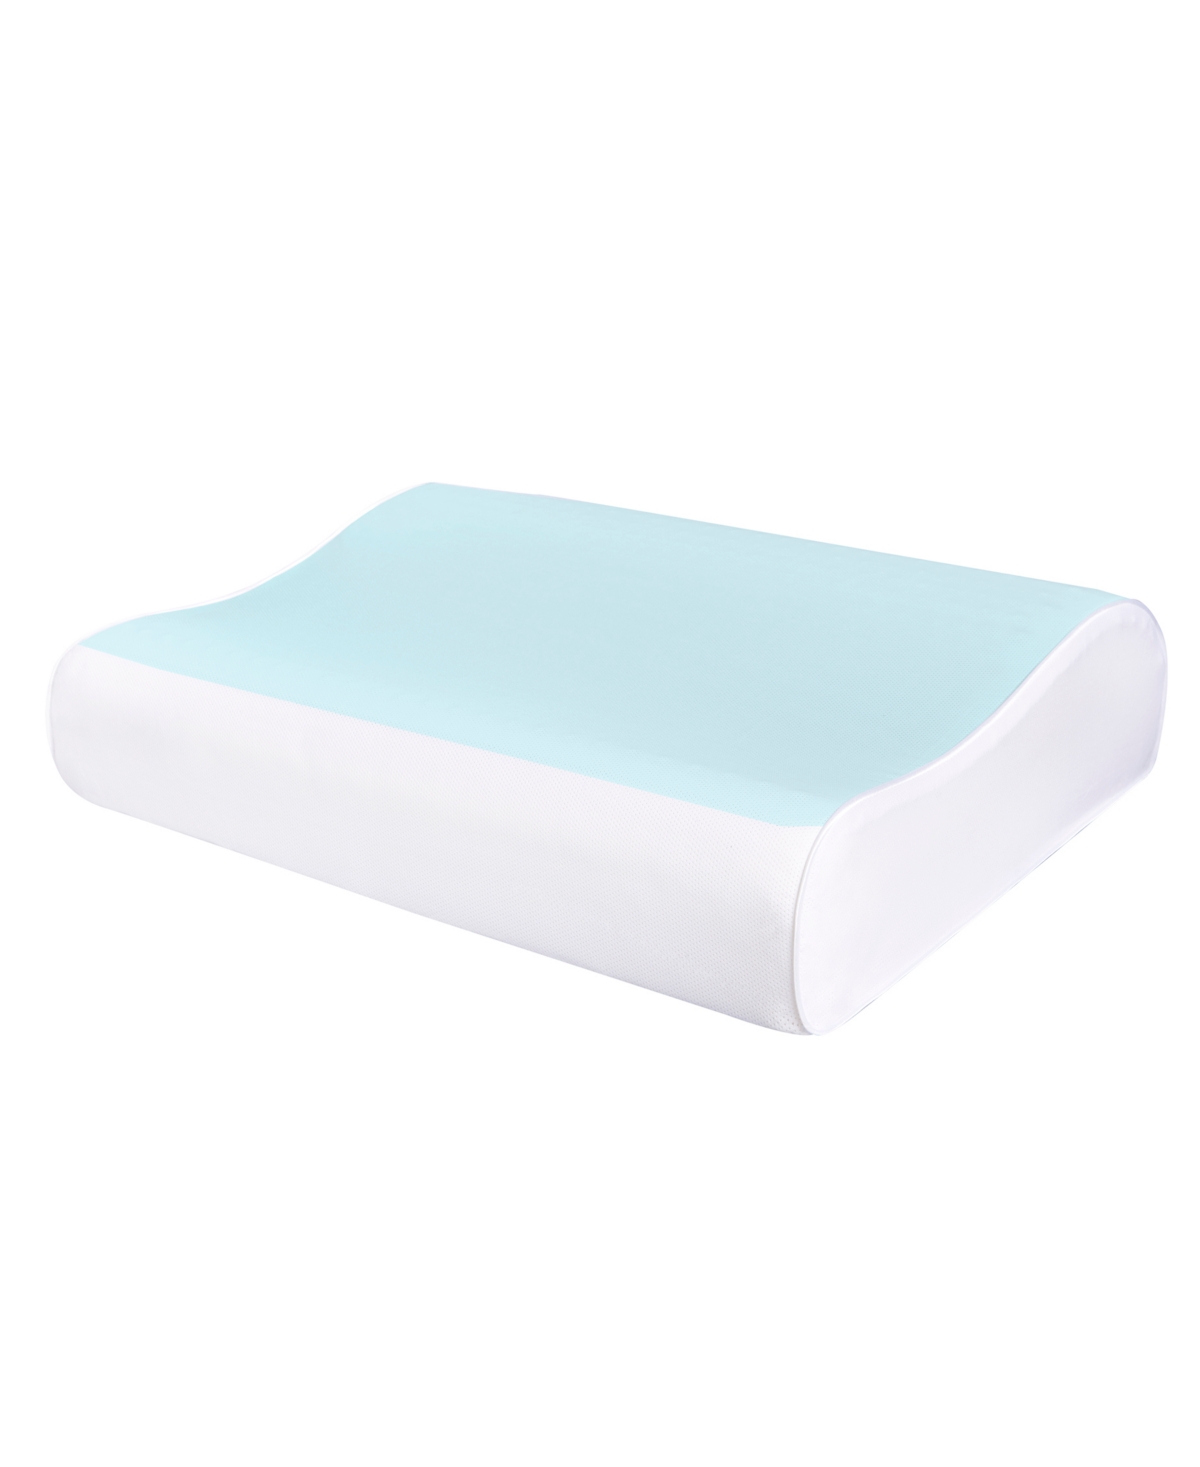 Comfort Revolution Memory Foam & Hydraluxe Cooling Bed Pillow